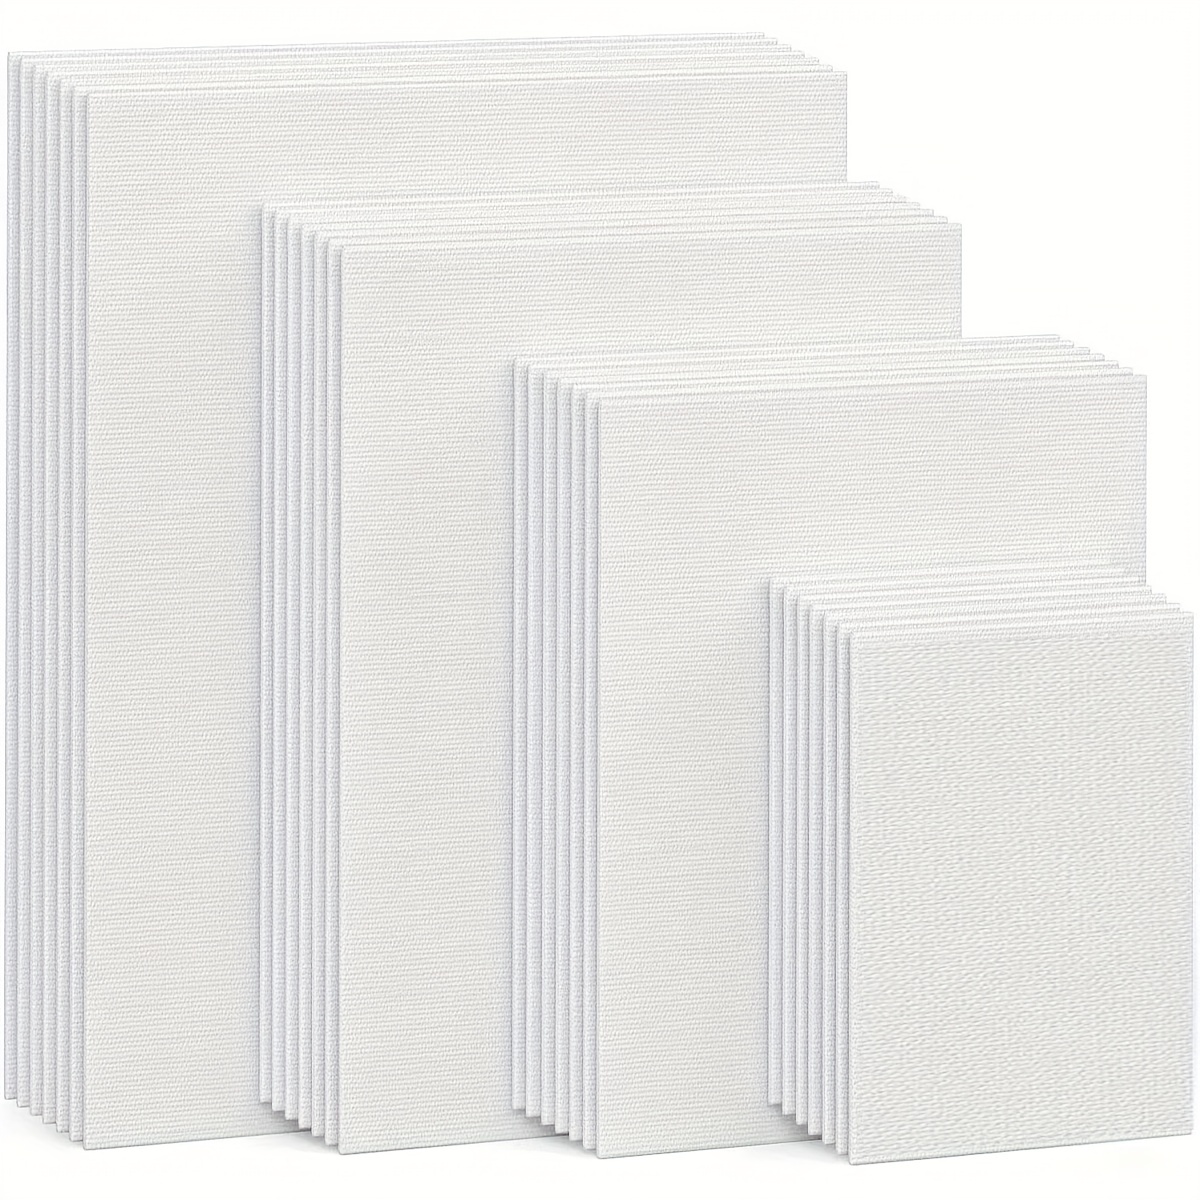 12pcs Canvas Boards For Painting, 8 X 10 Inch (20 X 25 Cm) Paint Canvases  For Painting, 100% Cotton Blank White Art Canvas Boards, 8 Oz Gesso-Primed